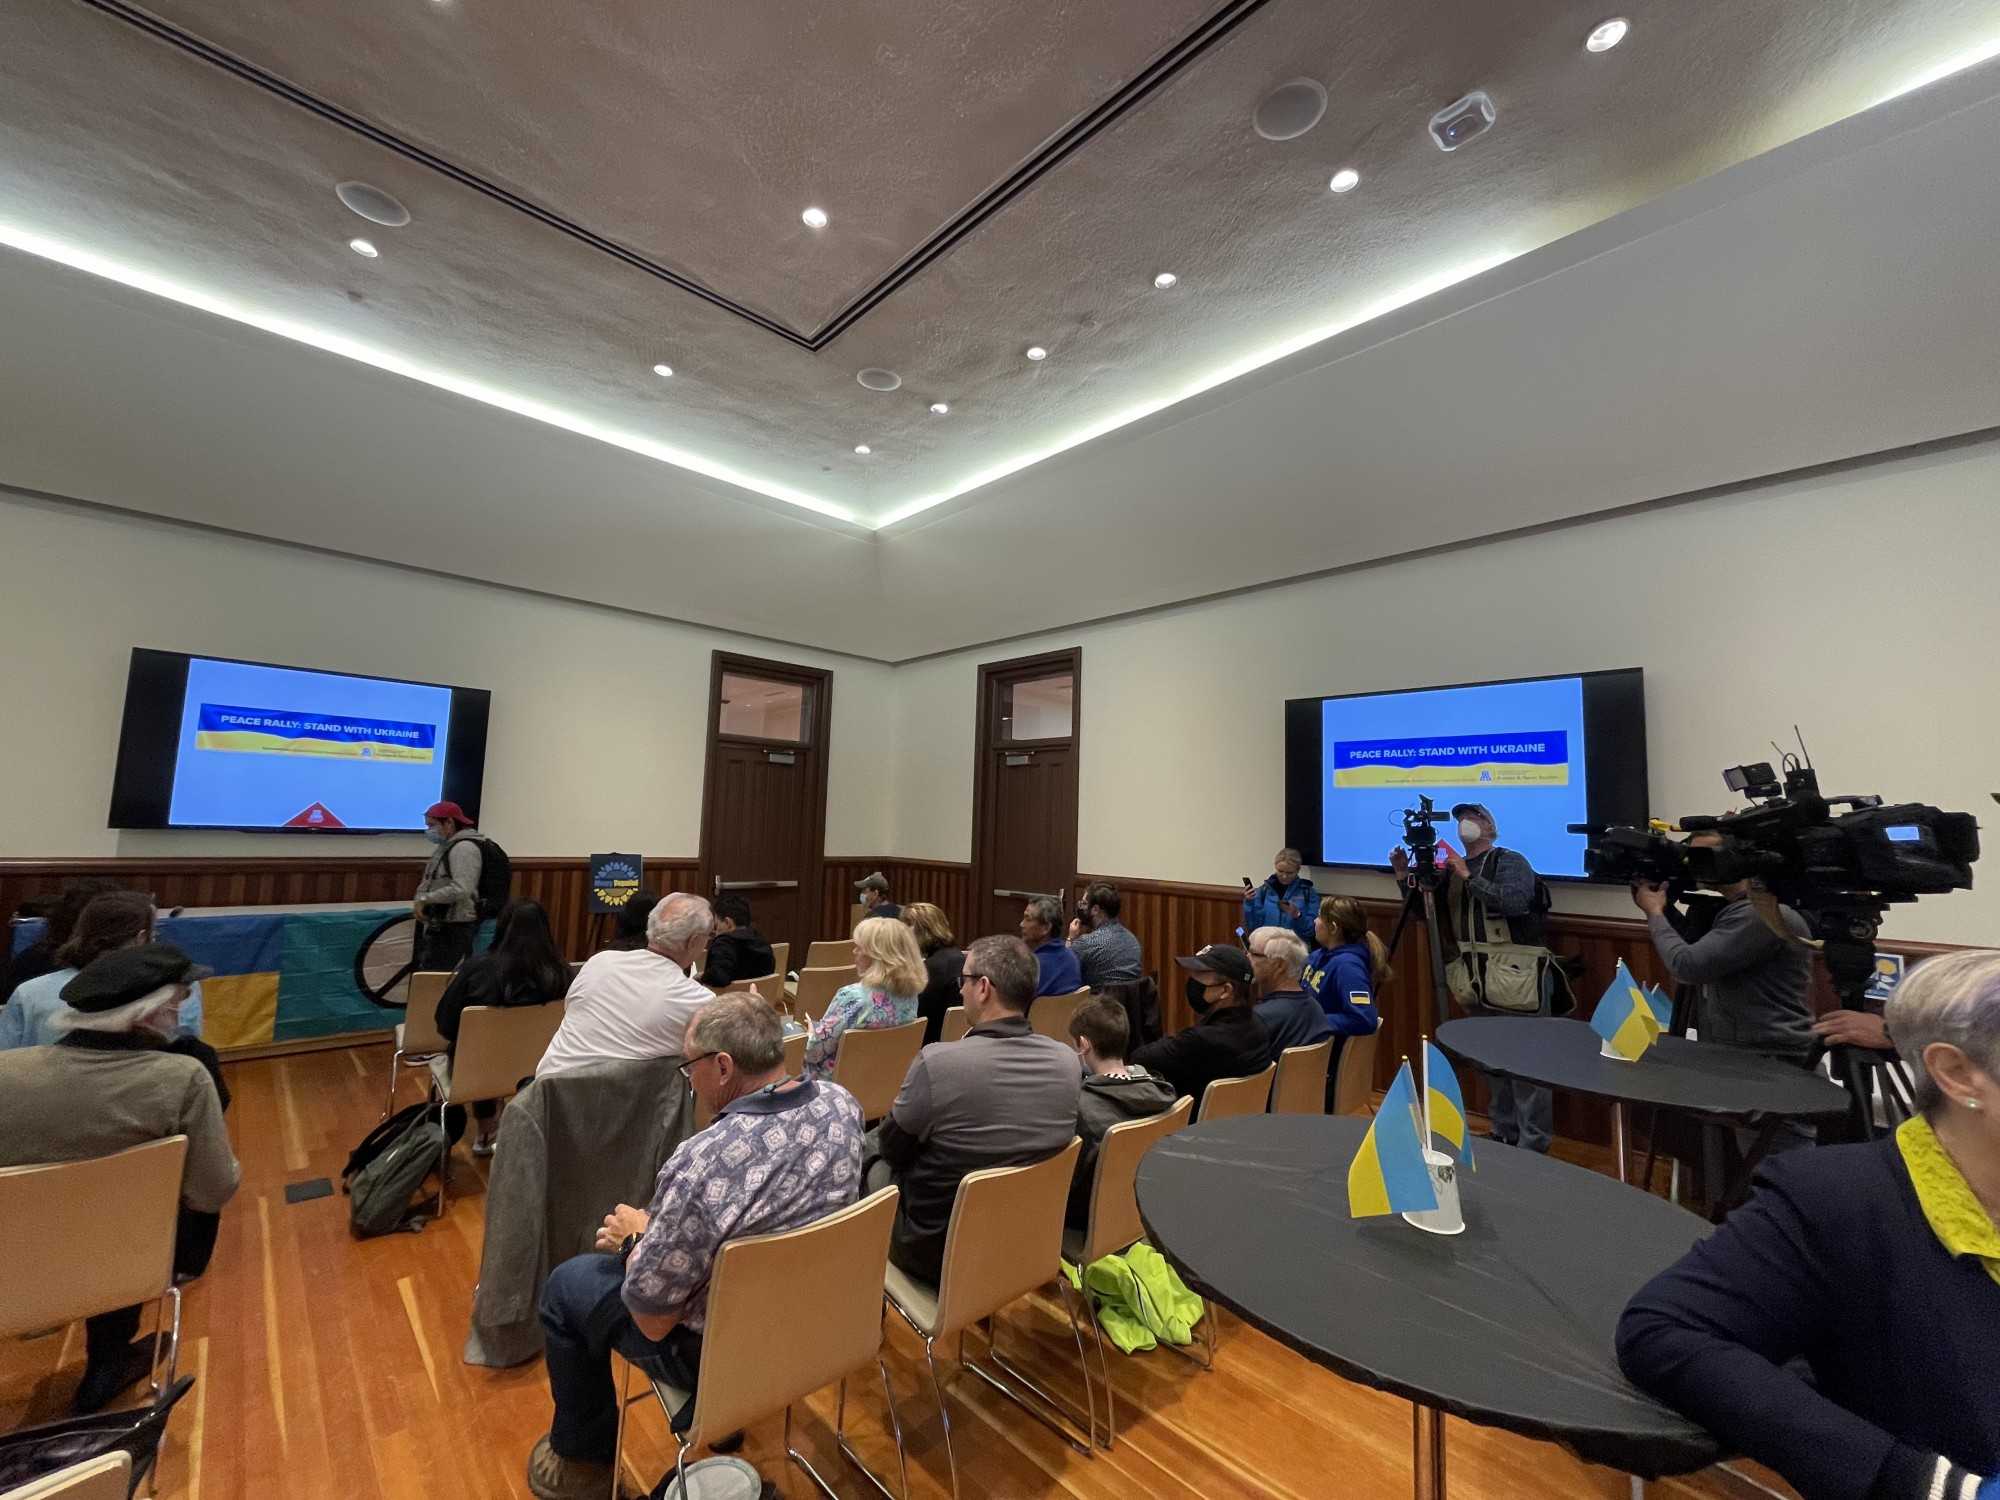 Attendees at the Silver and Sage Room in Old Main during a peace rally on Tuesday, March 29 to support Ukraine, and for those in the community affected by the invasion of the nation by Russian military forces.